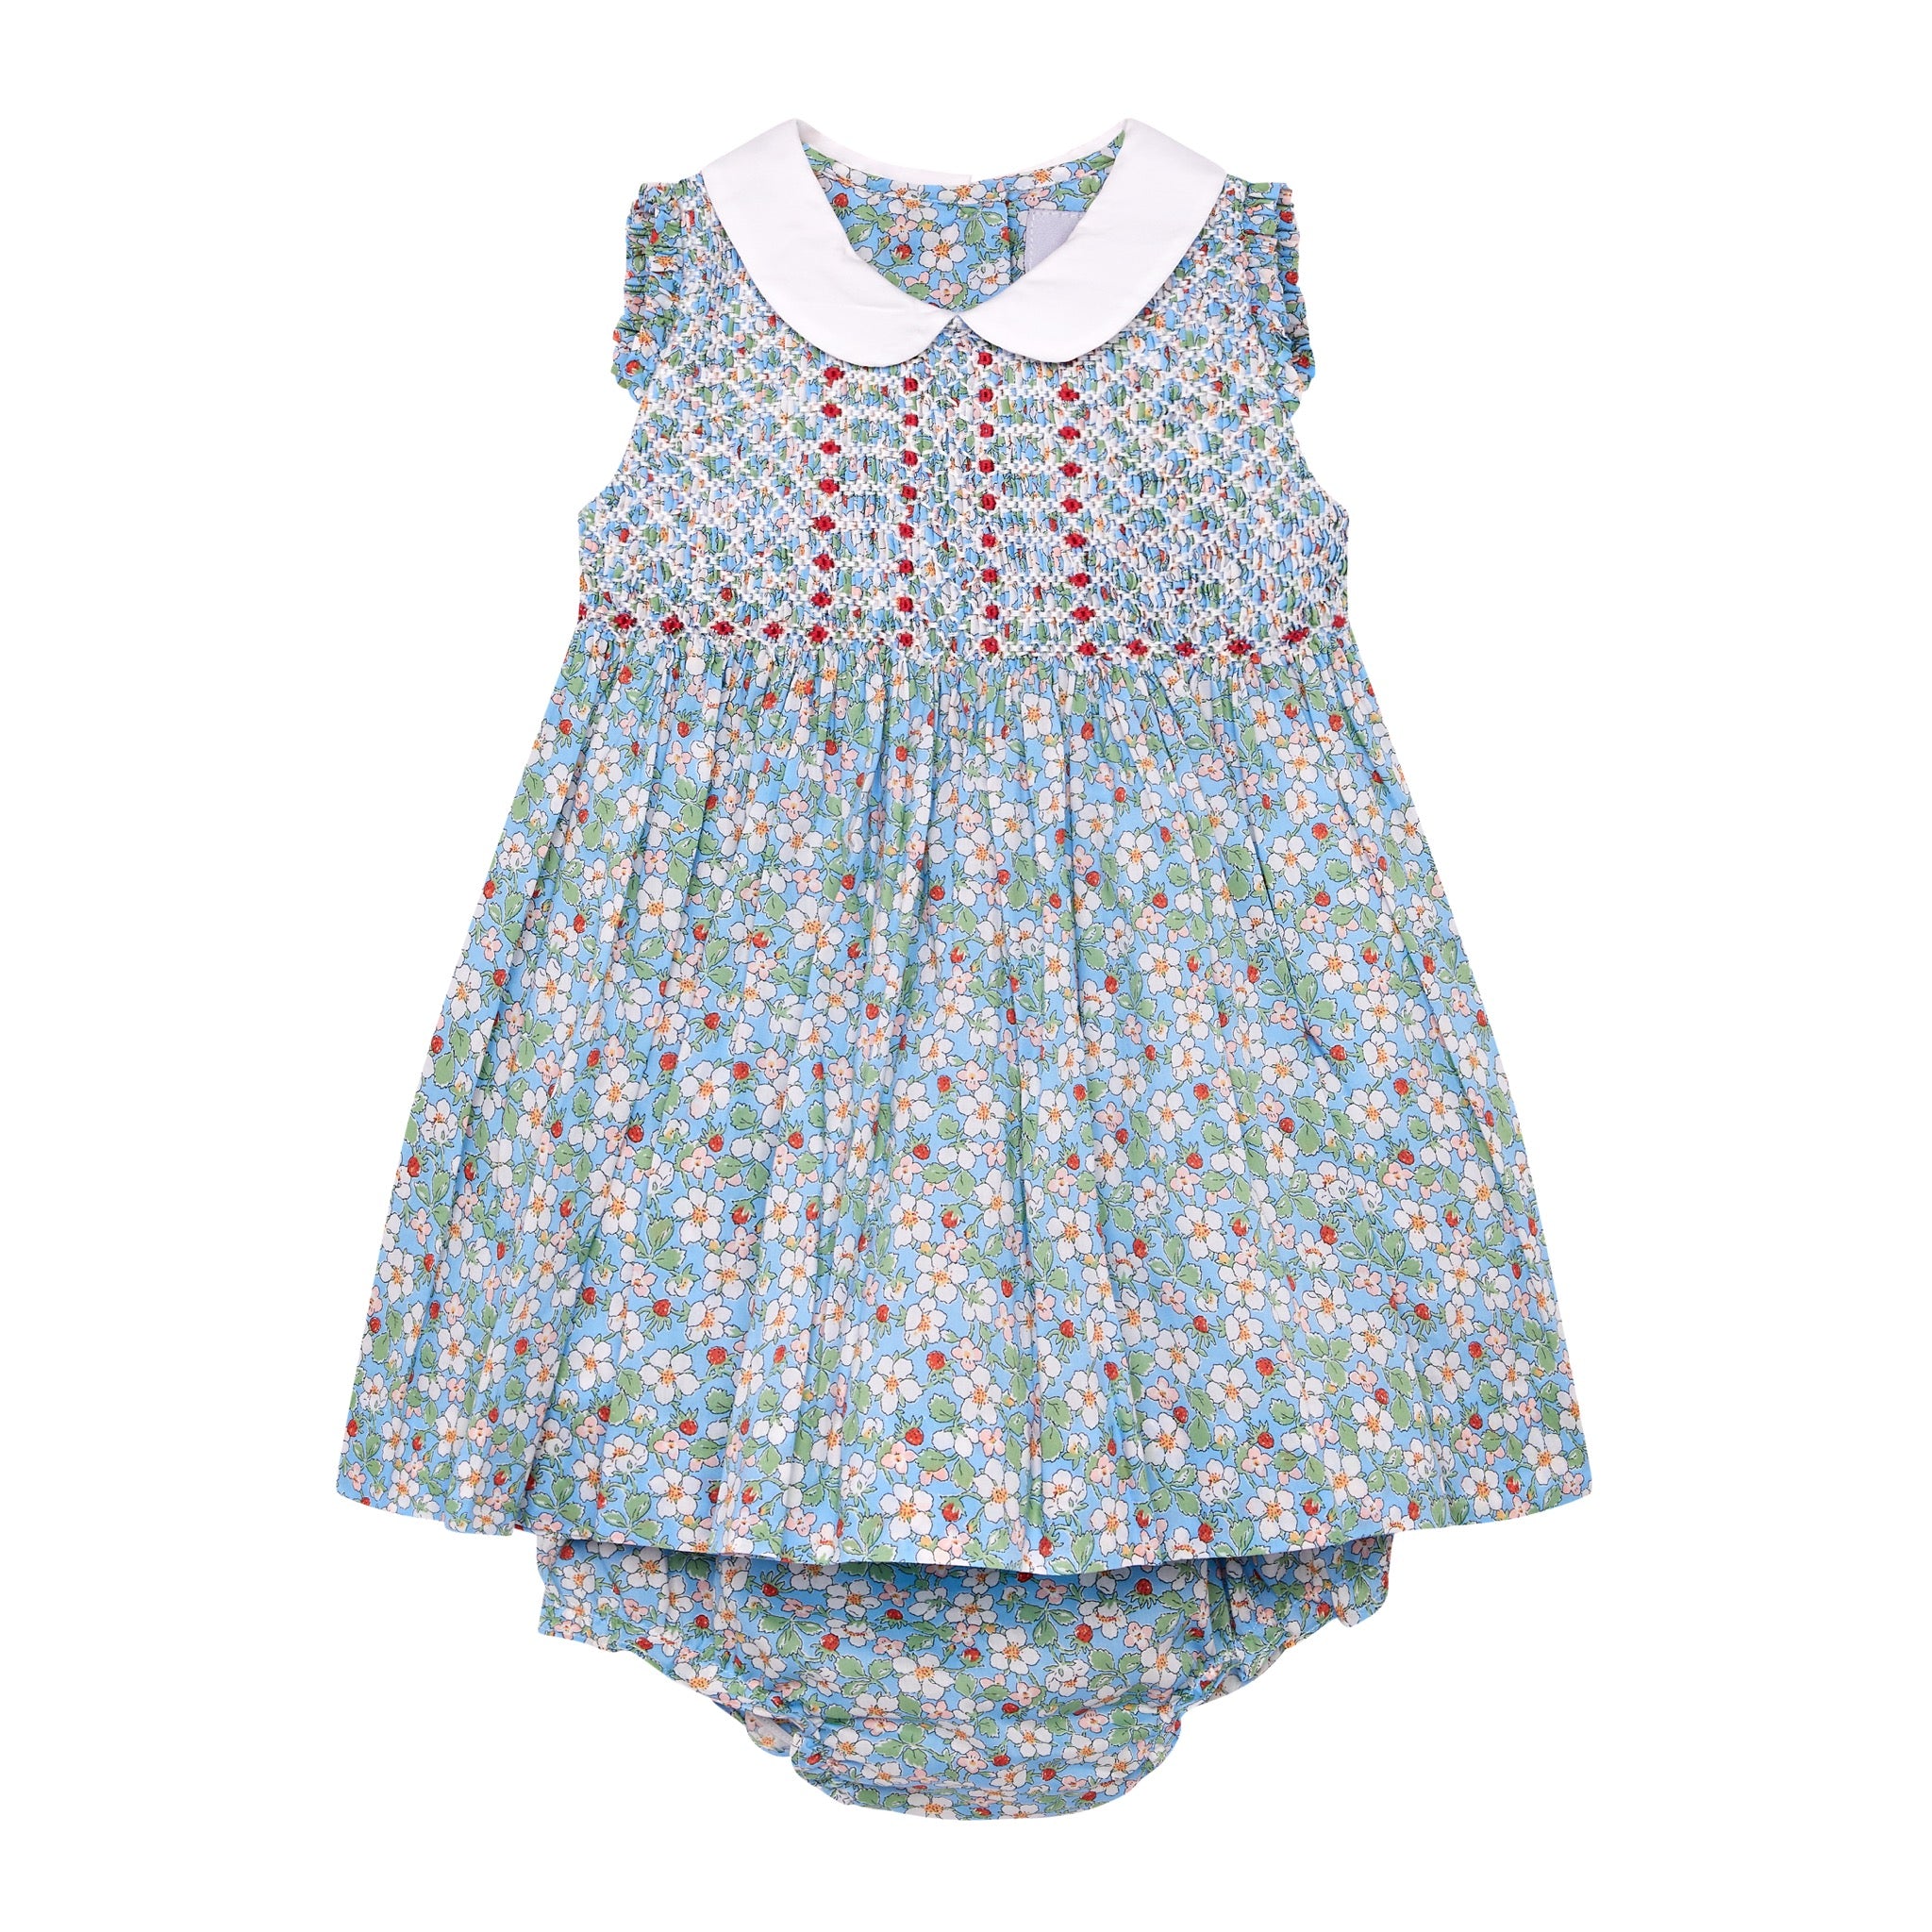 Liberty fabric, hand-smocked baby dress, front